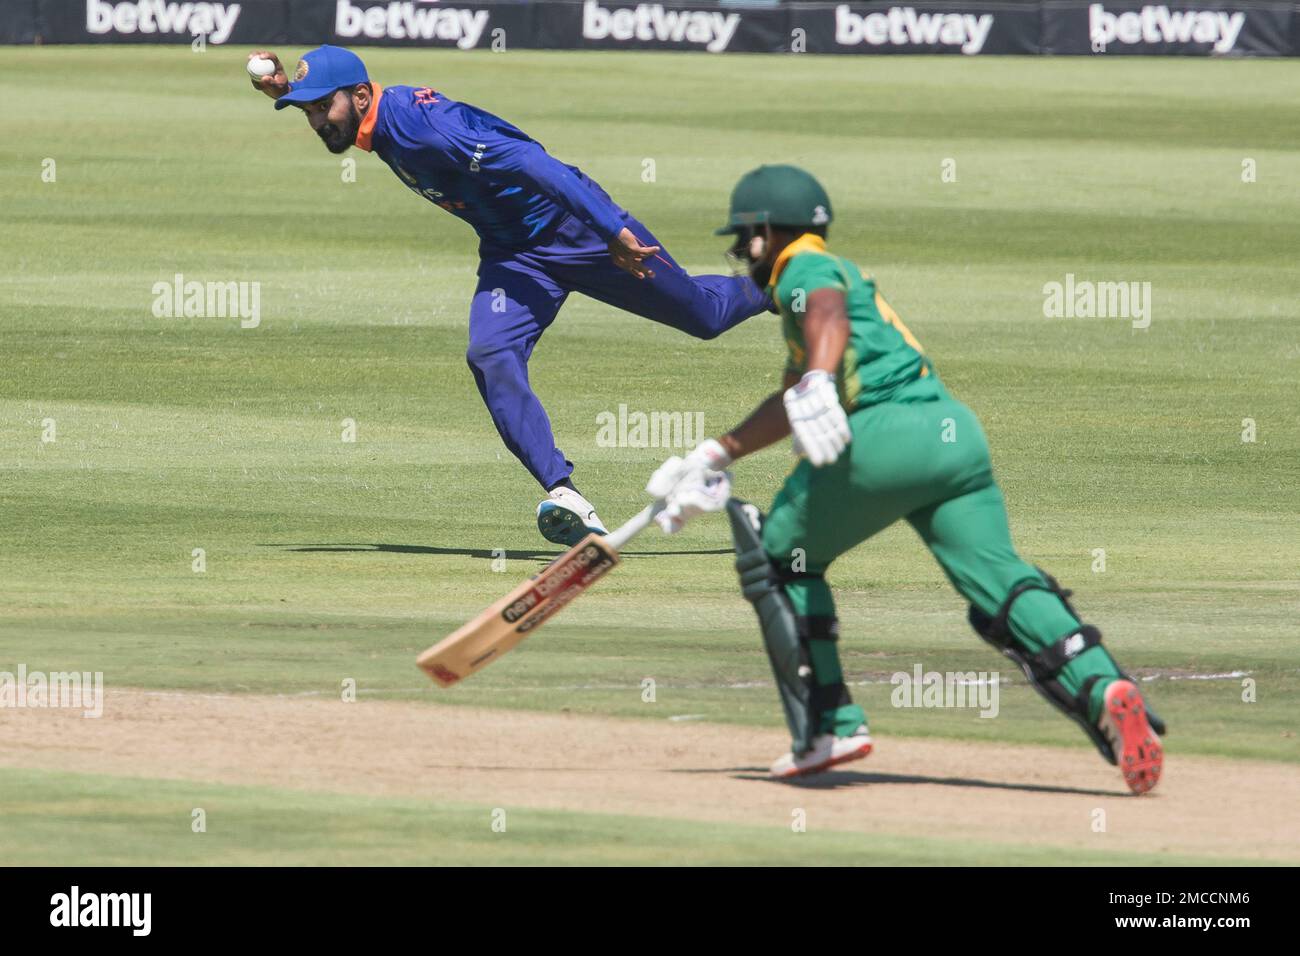 Indian Captain Kunnar Rahlc races to run Temba Bavuma out during the third  ODI match between South Africa and India at Newlands, Cape Town, South  Africa, Sunday, Jan. 23, 2022. (AP Photo/Halden